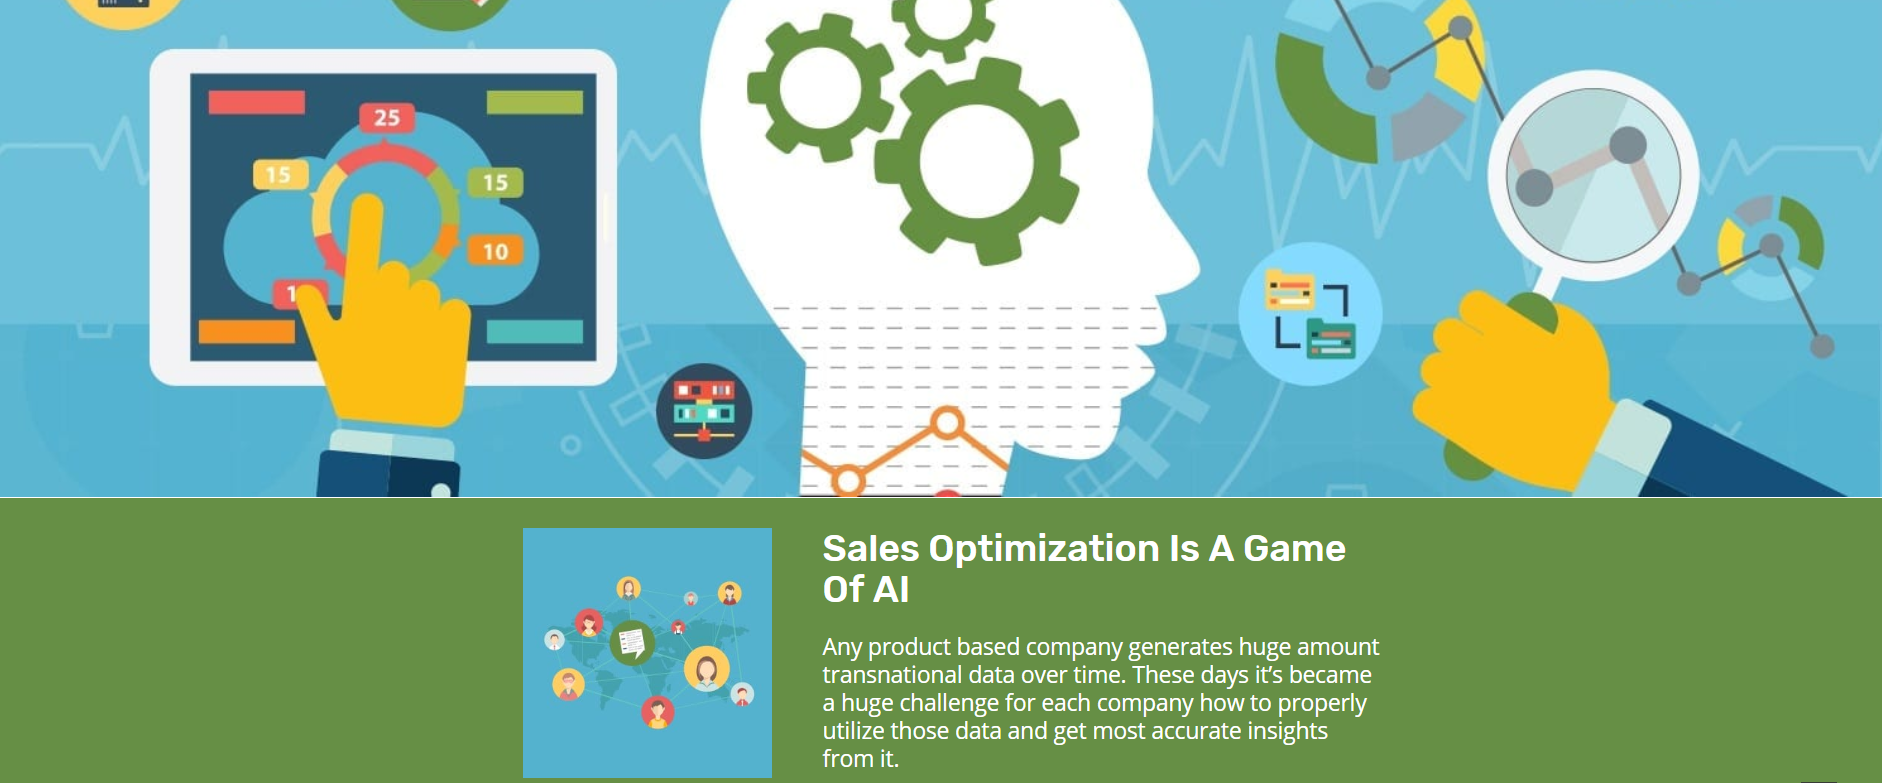 Sales Optimization Is A Game Of AI